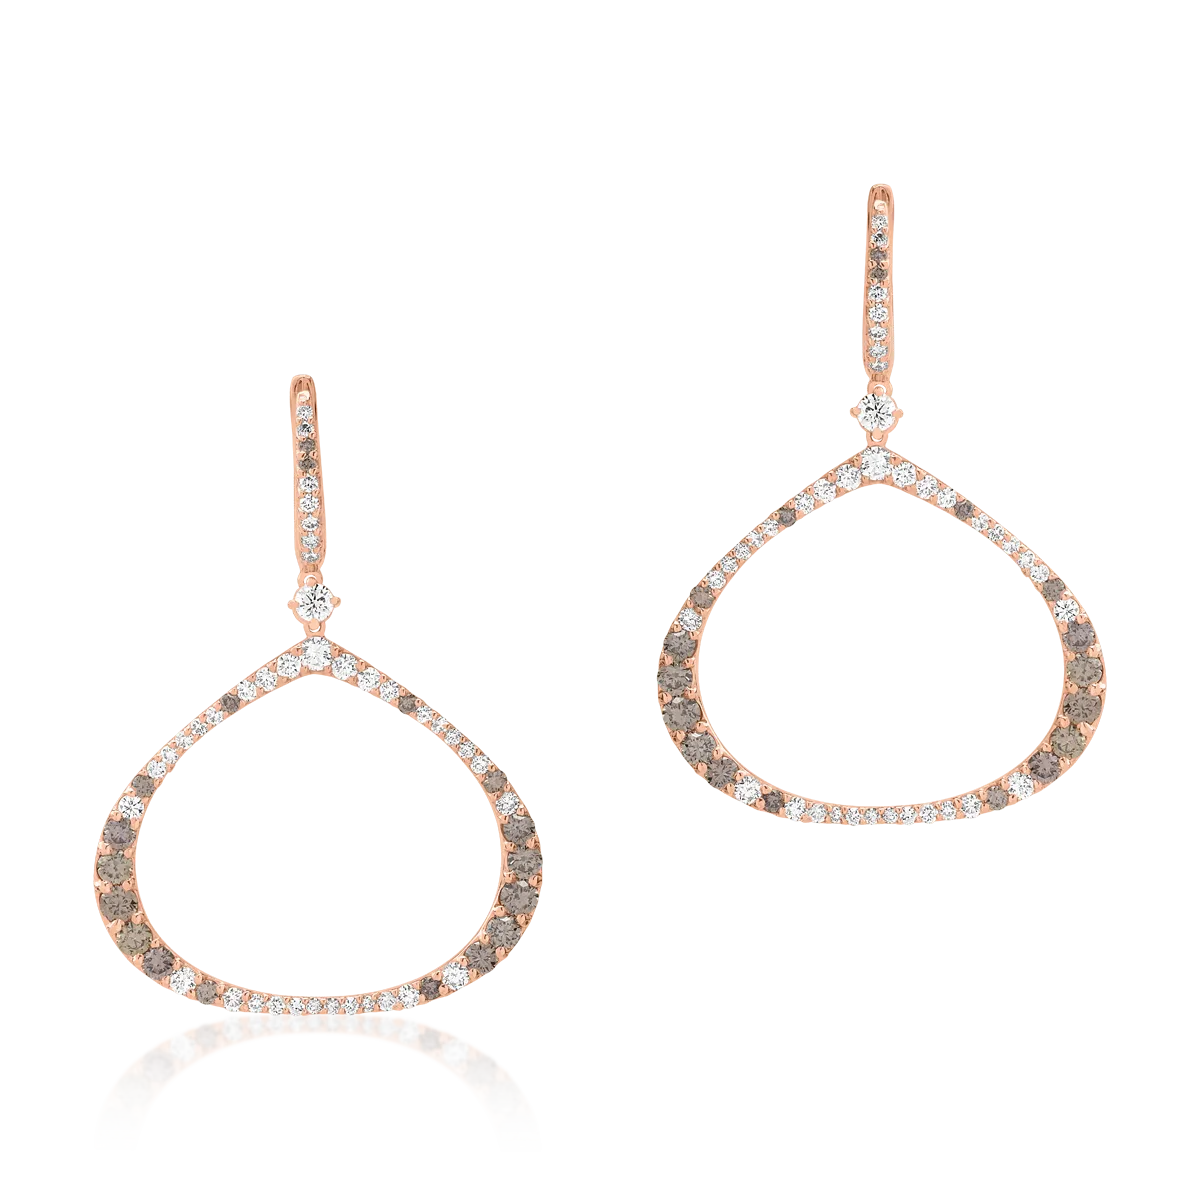 18K rose gold earrings with 1.63ct brown diamonds and 1.48ct diamonds